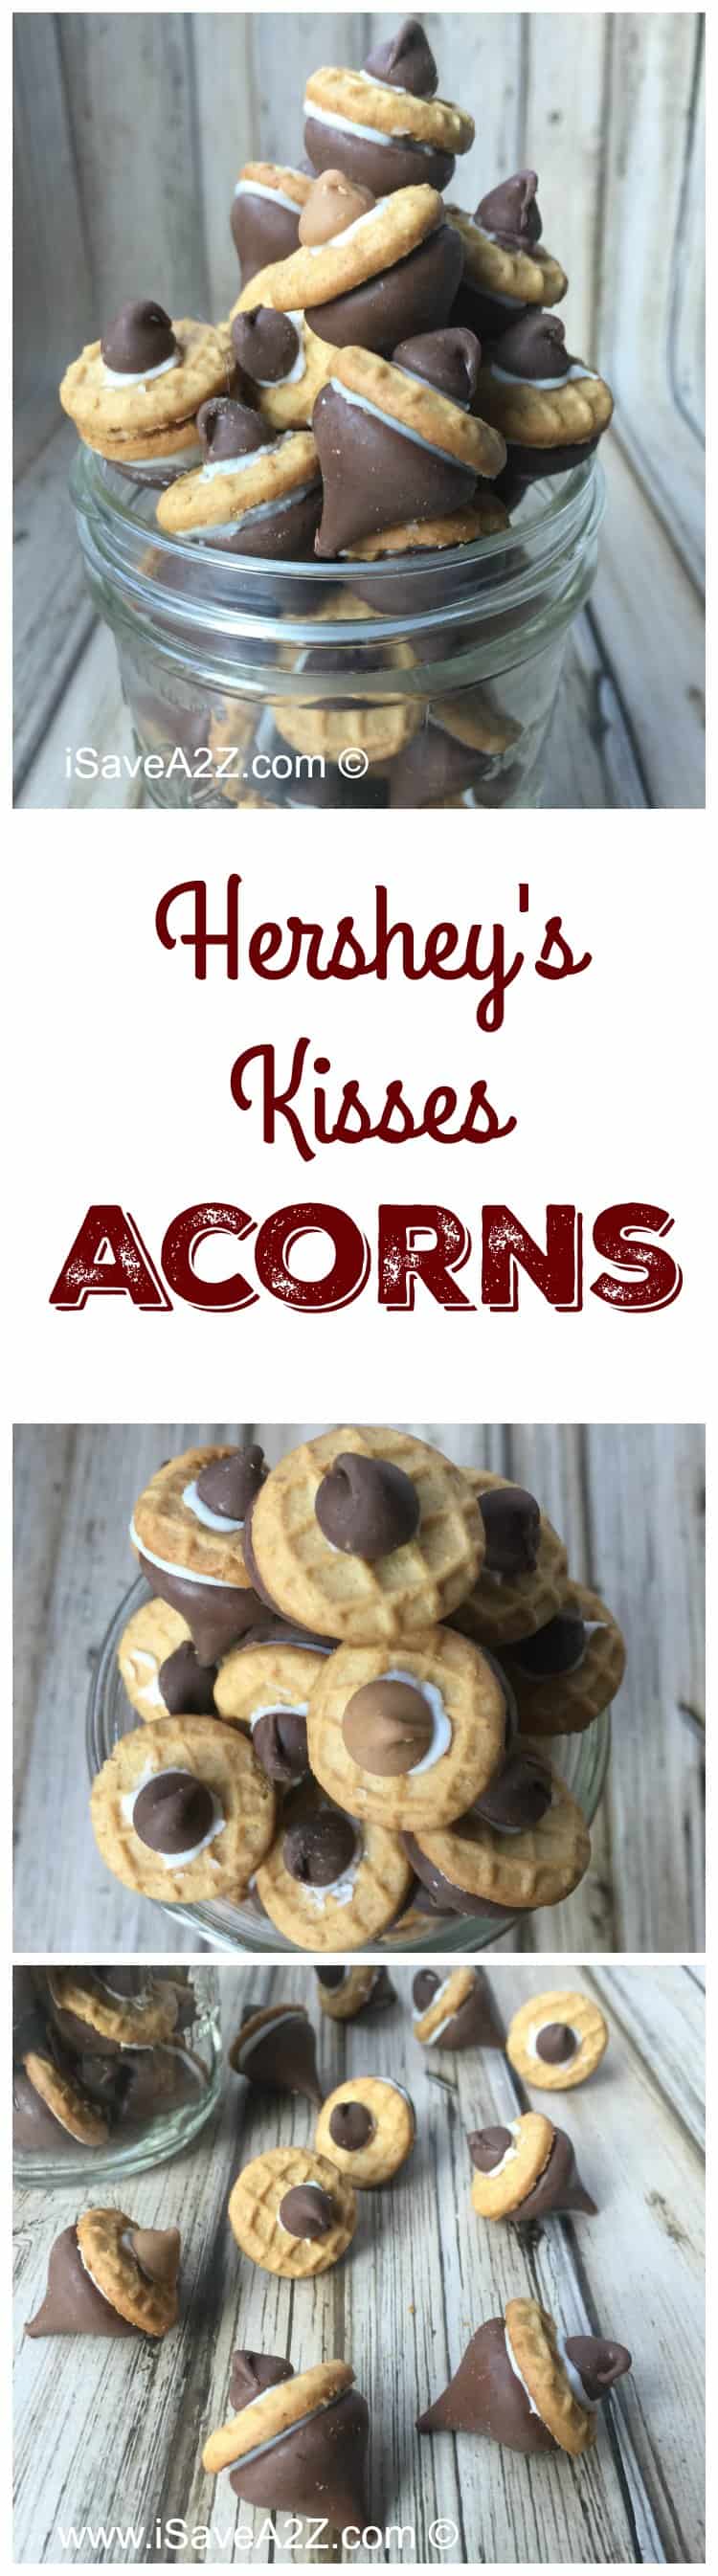 Cute Acorns made out of Hershey's Kisses